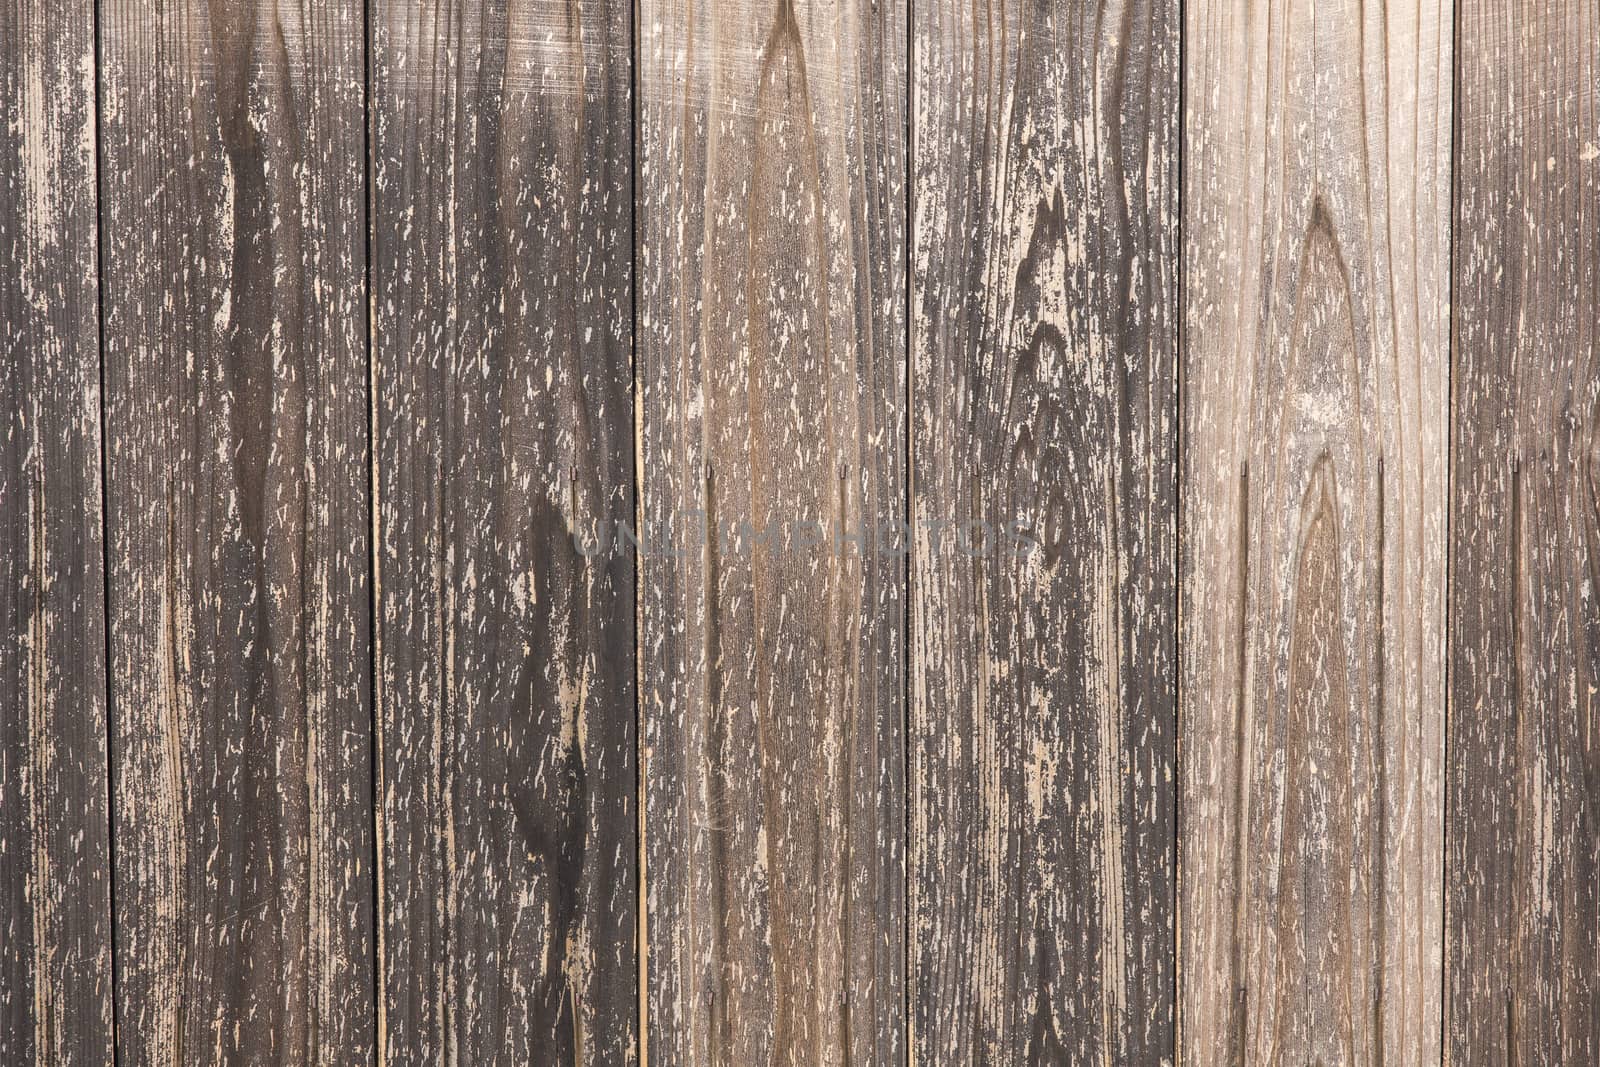 Old wood planks background and texture detail by 2nix